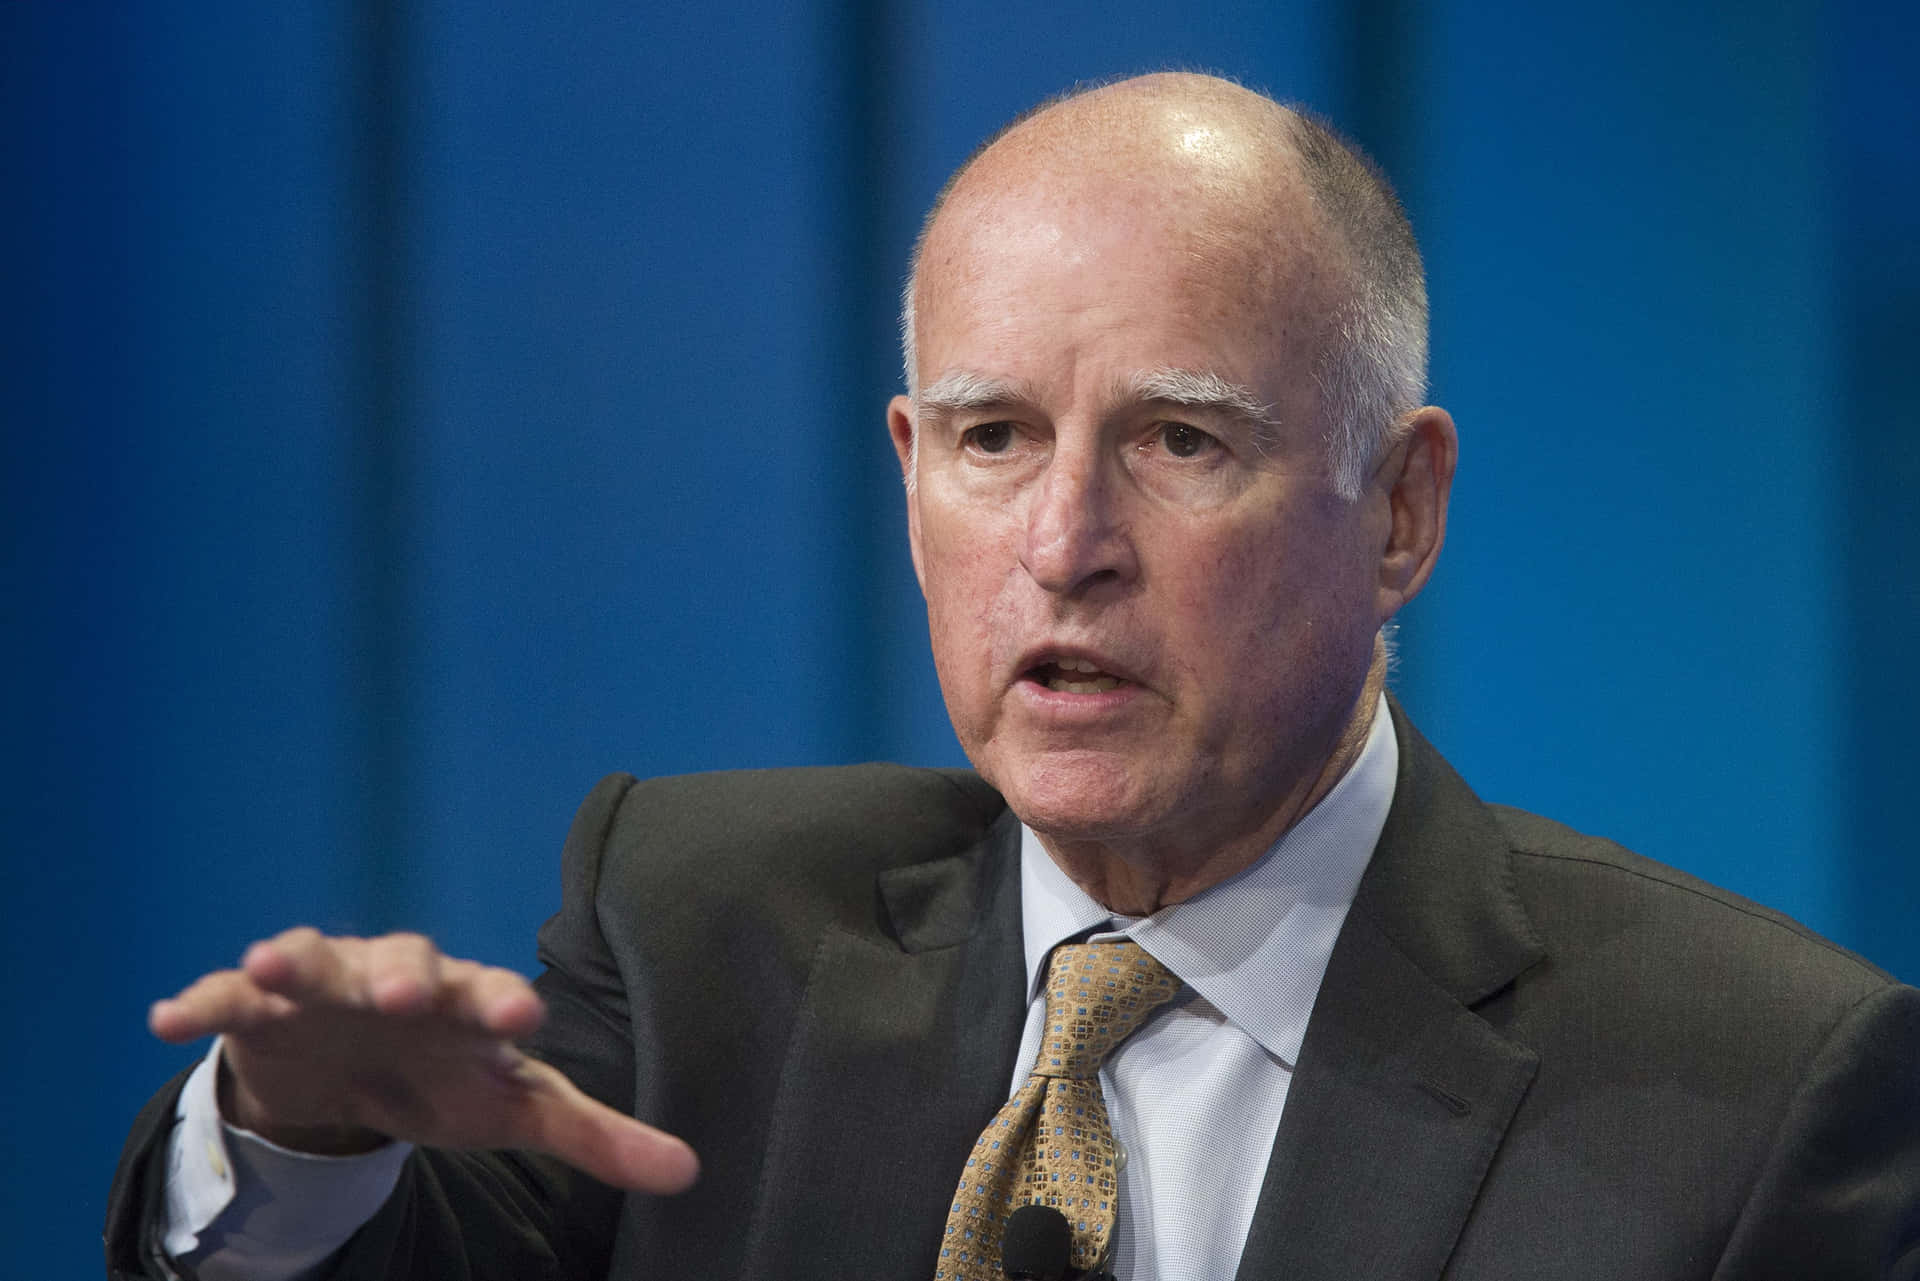 Governor Jerry Brown Making a Statement Wallpaper